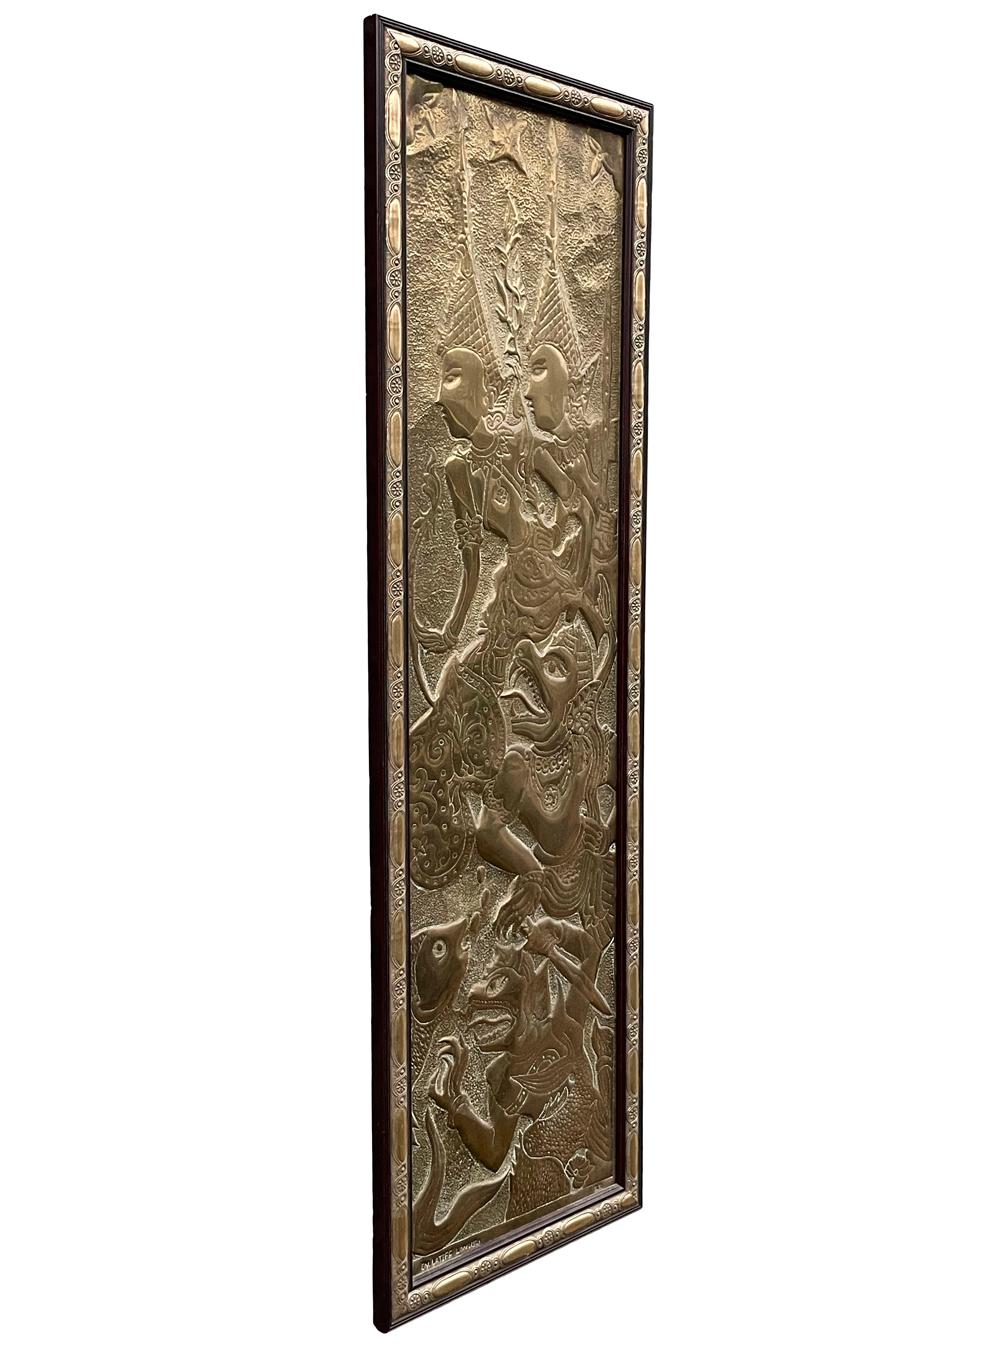 A brass wall sculpture circa 1960's most likely from Cambodia. Comes signed and with framed. Free continental USA shipping available.